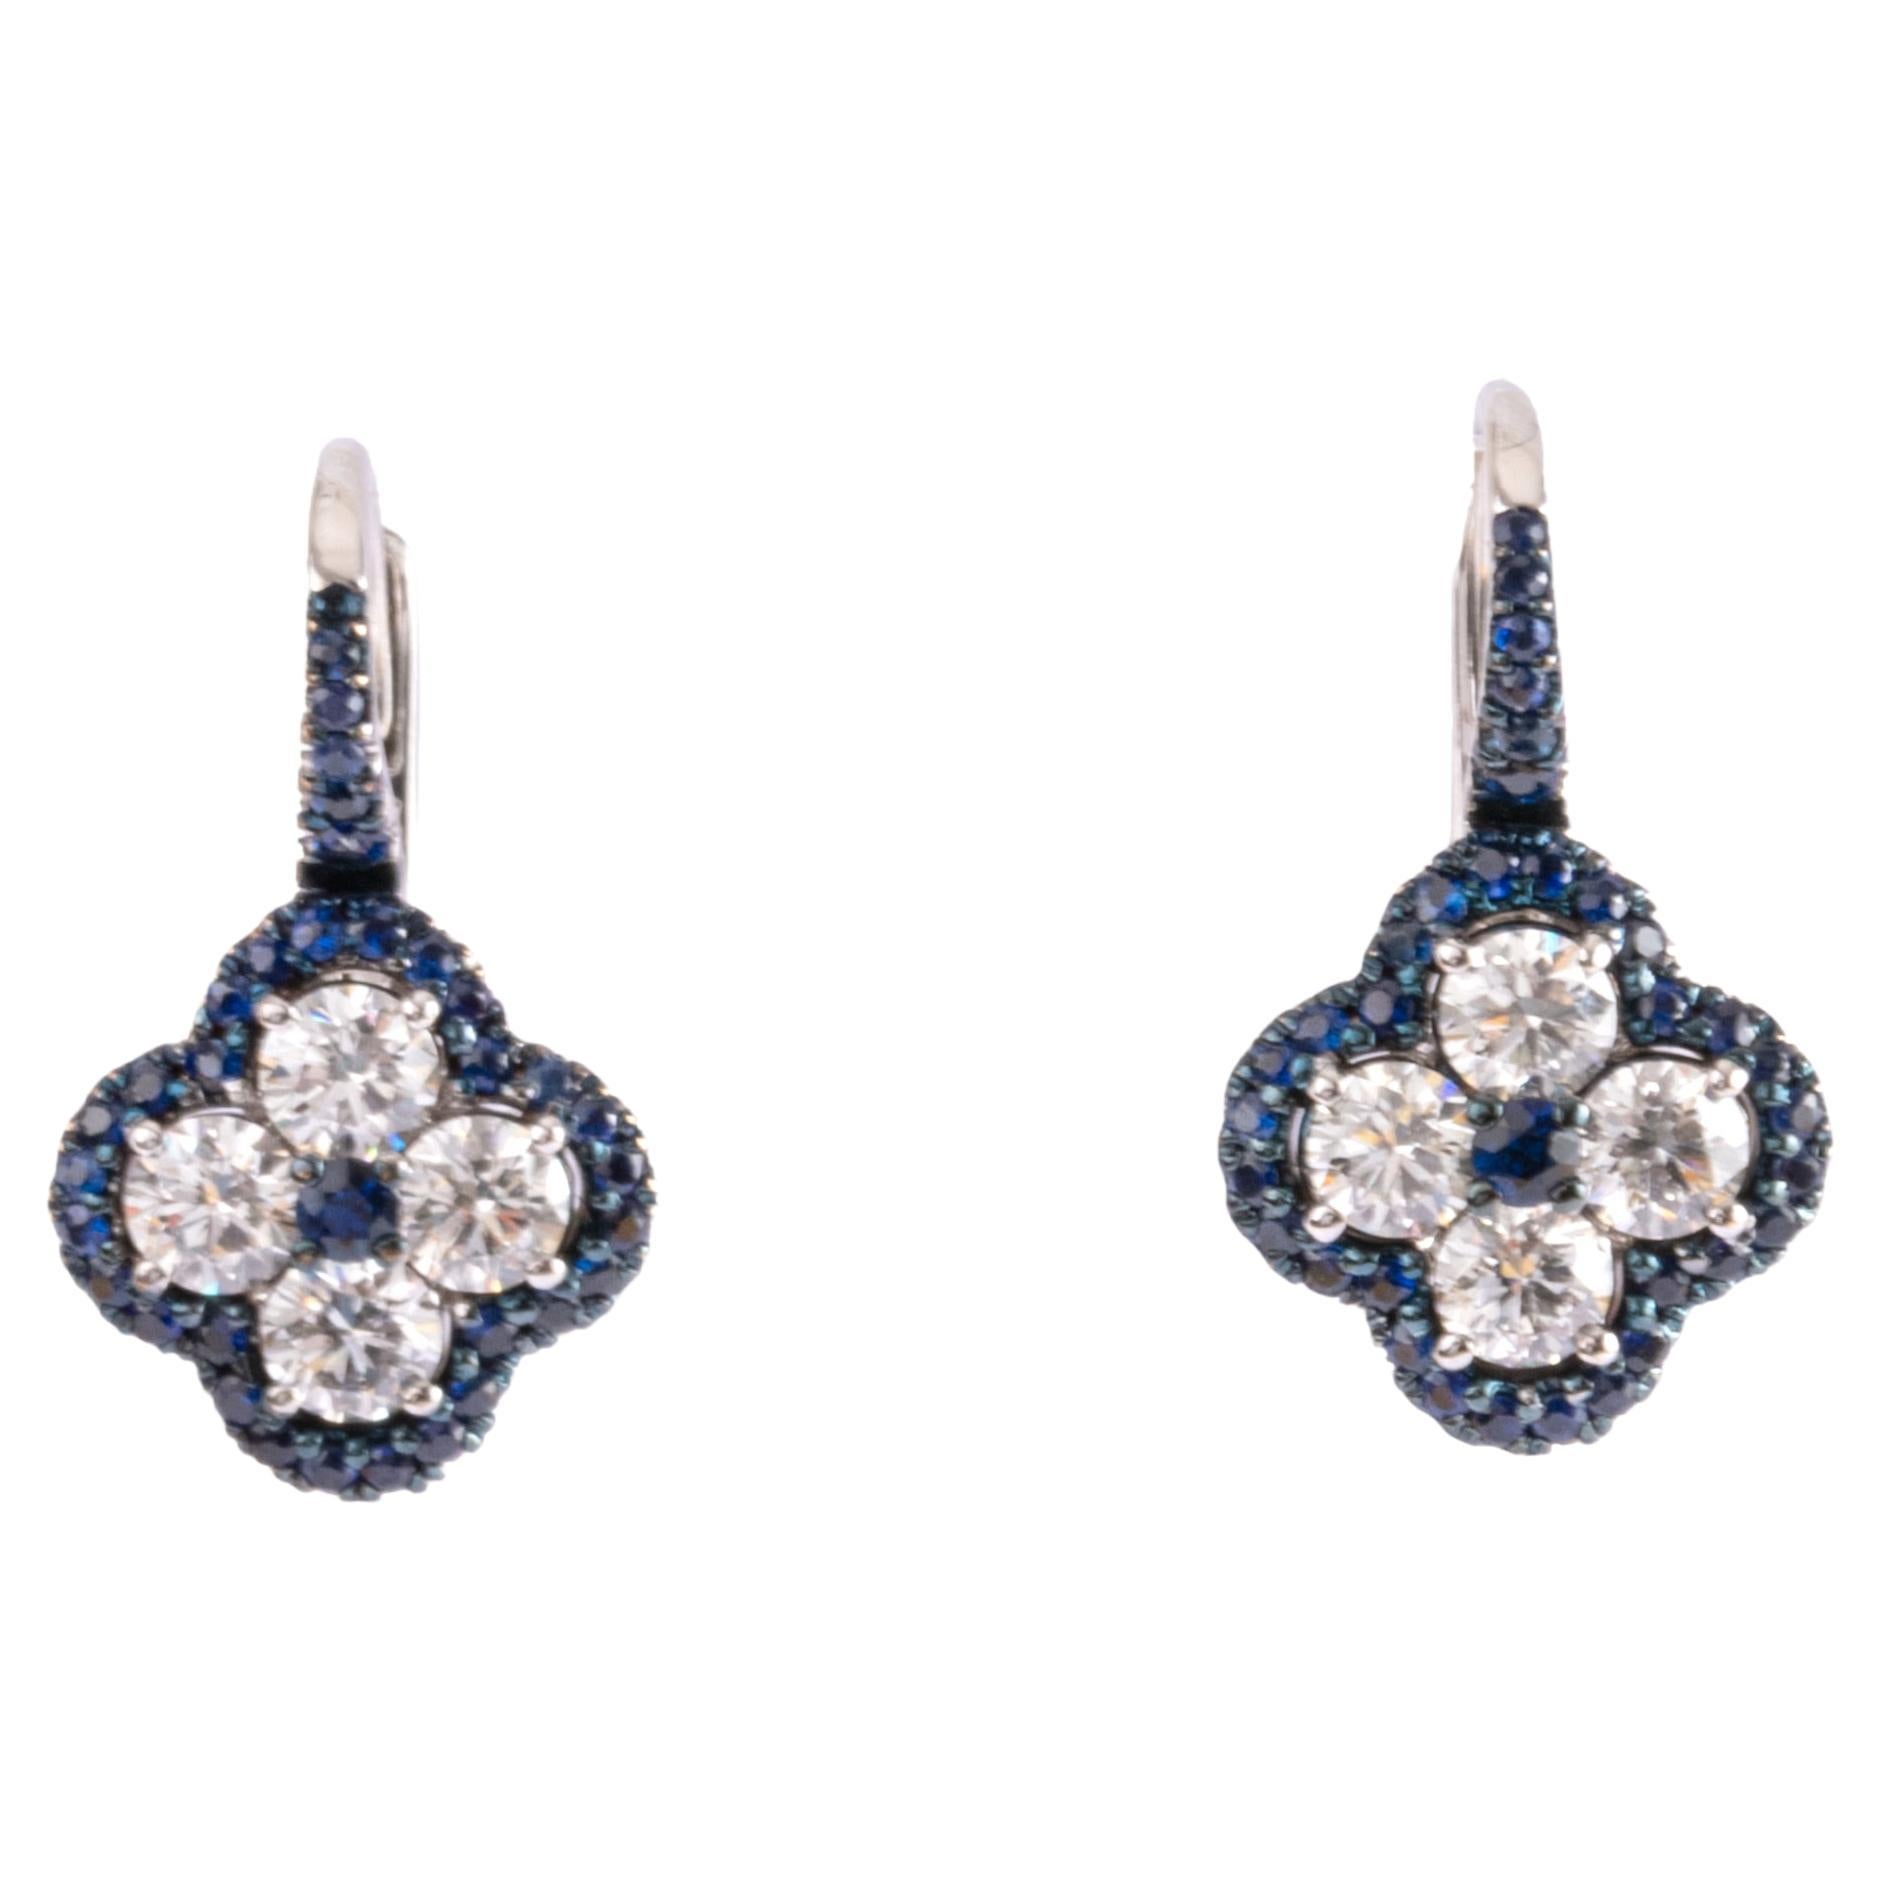 Crivelli Four-Leaf Clover White Gold Brilliant and Sapphire Earrings For Sale